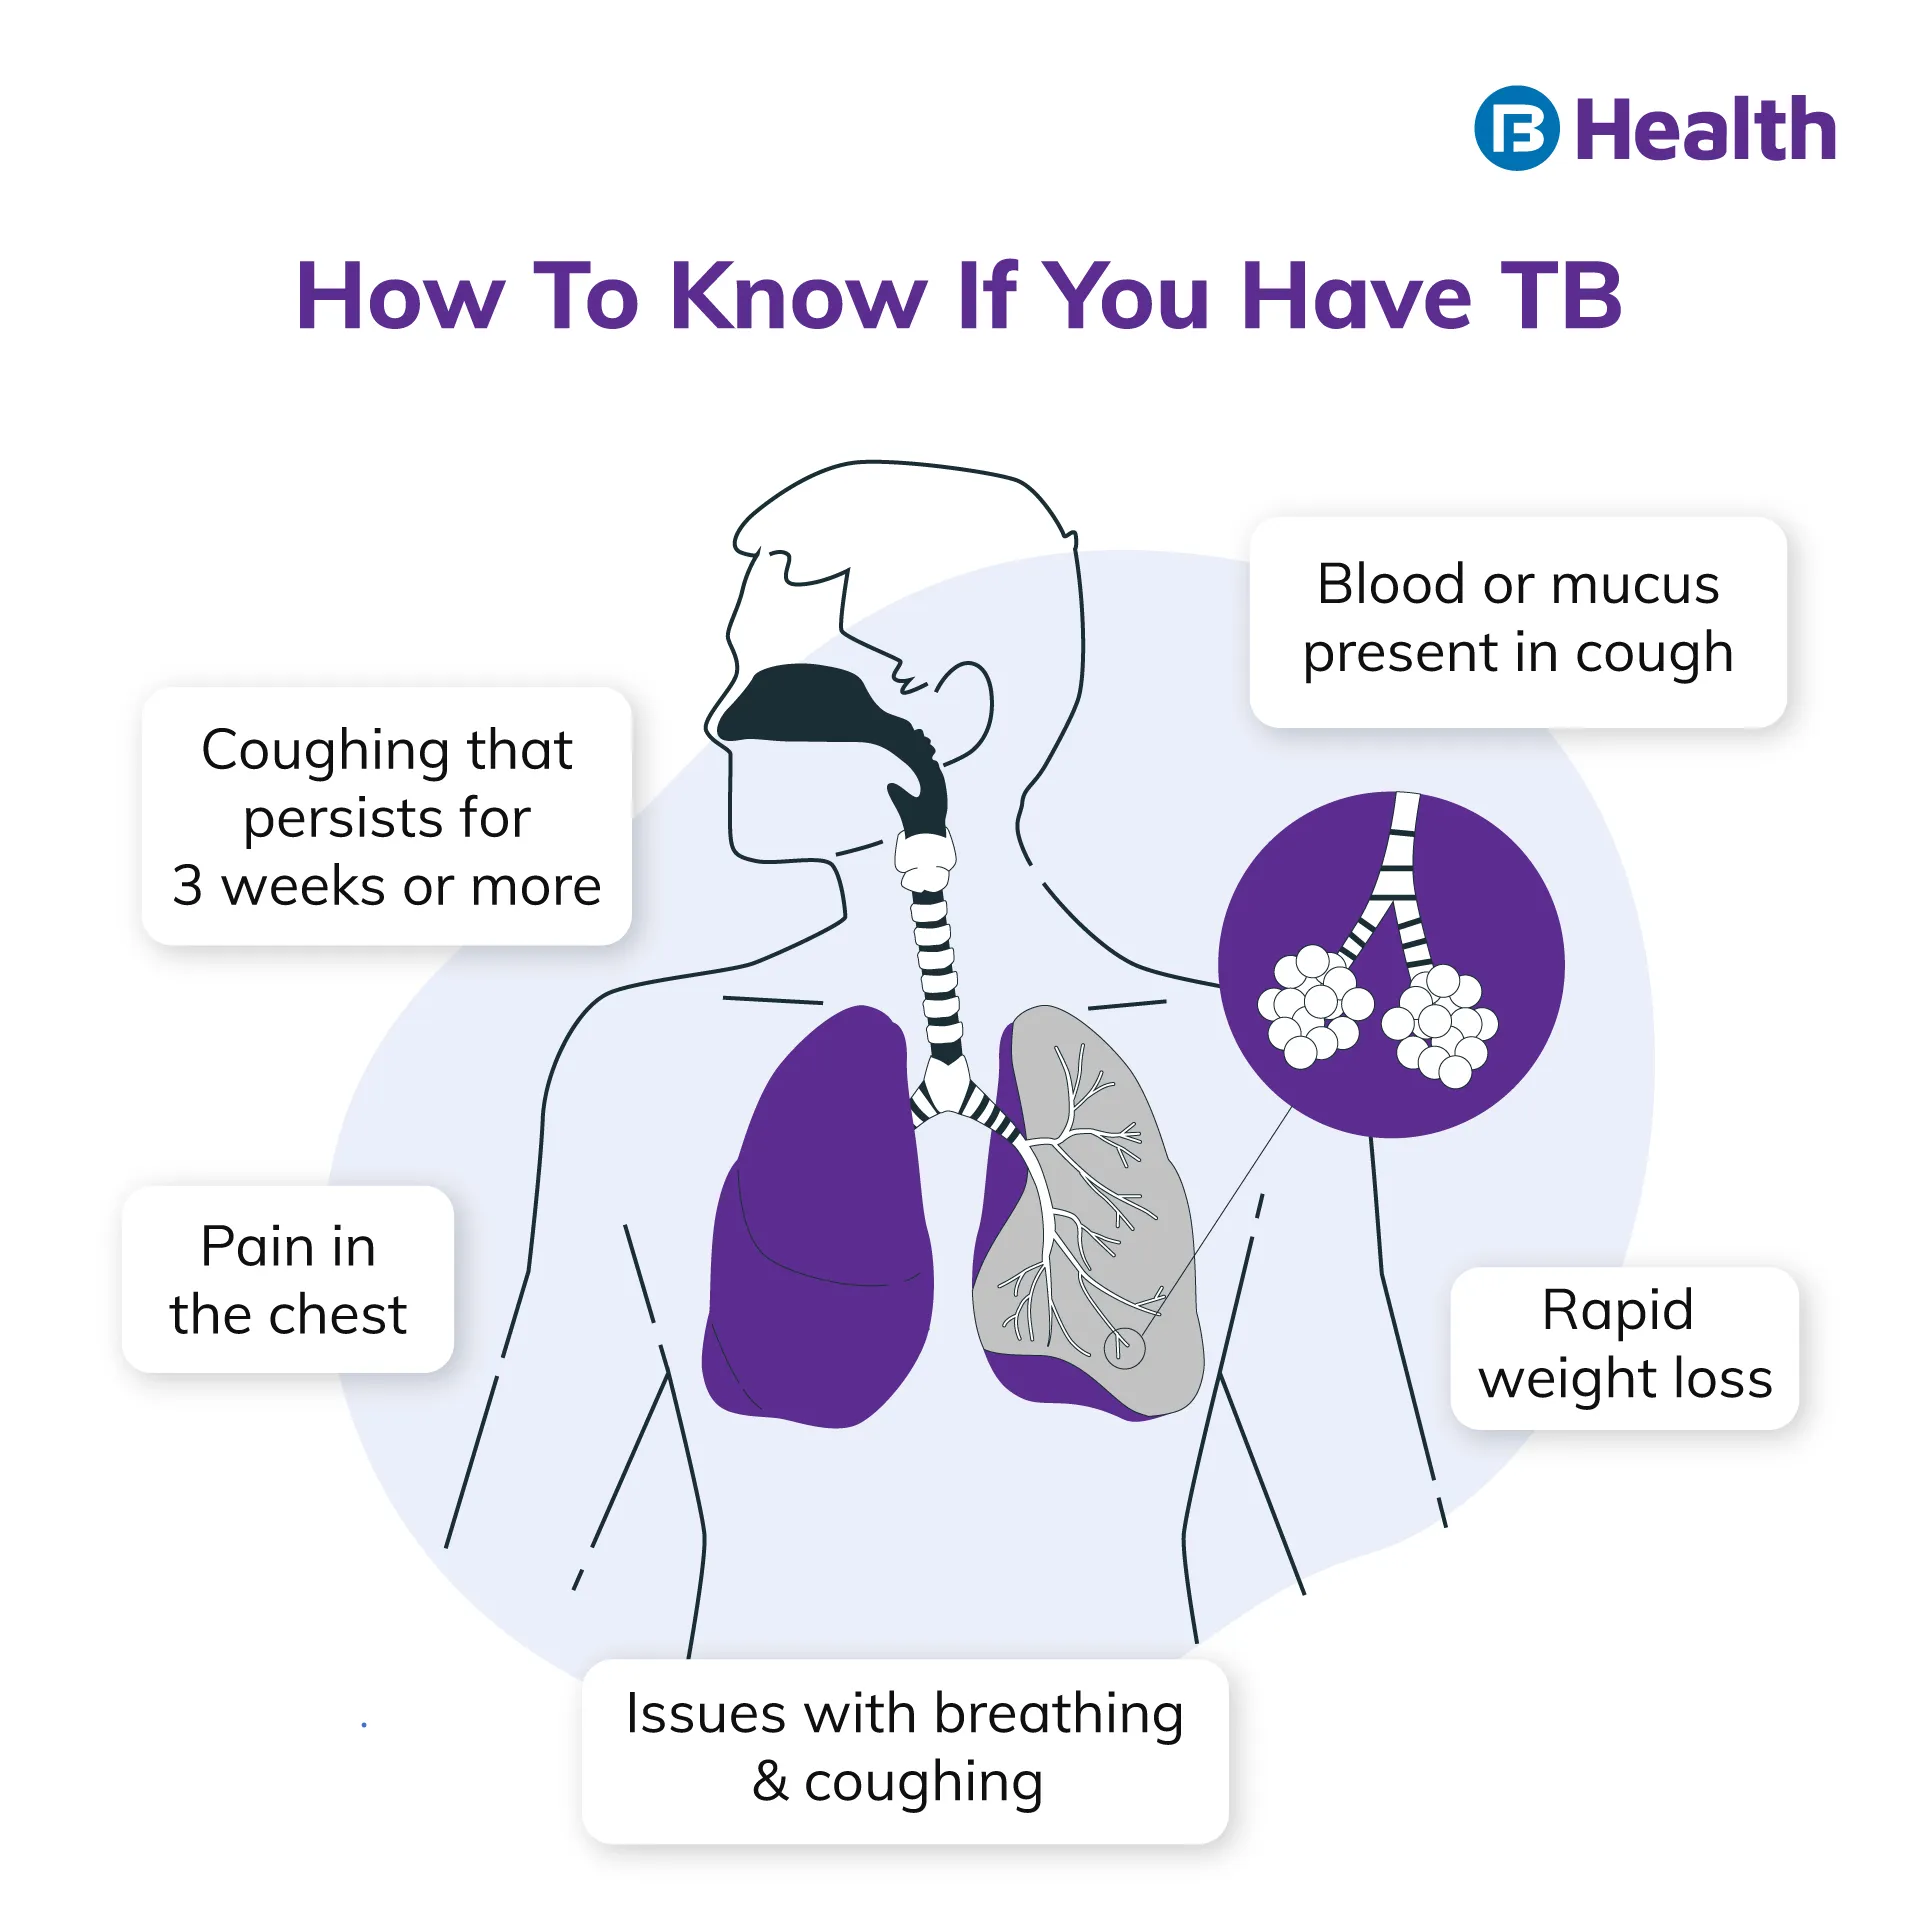 Signs of TB